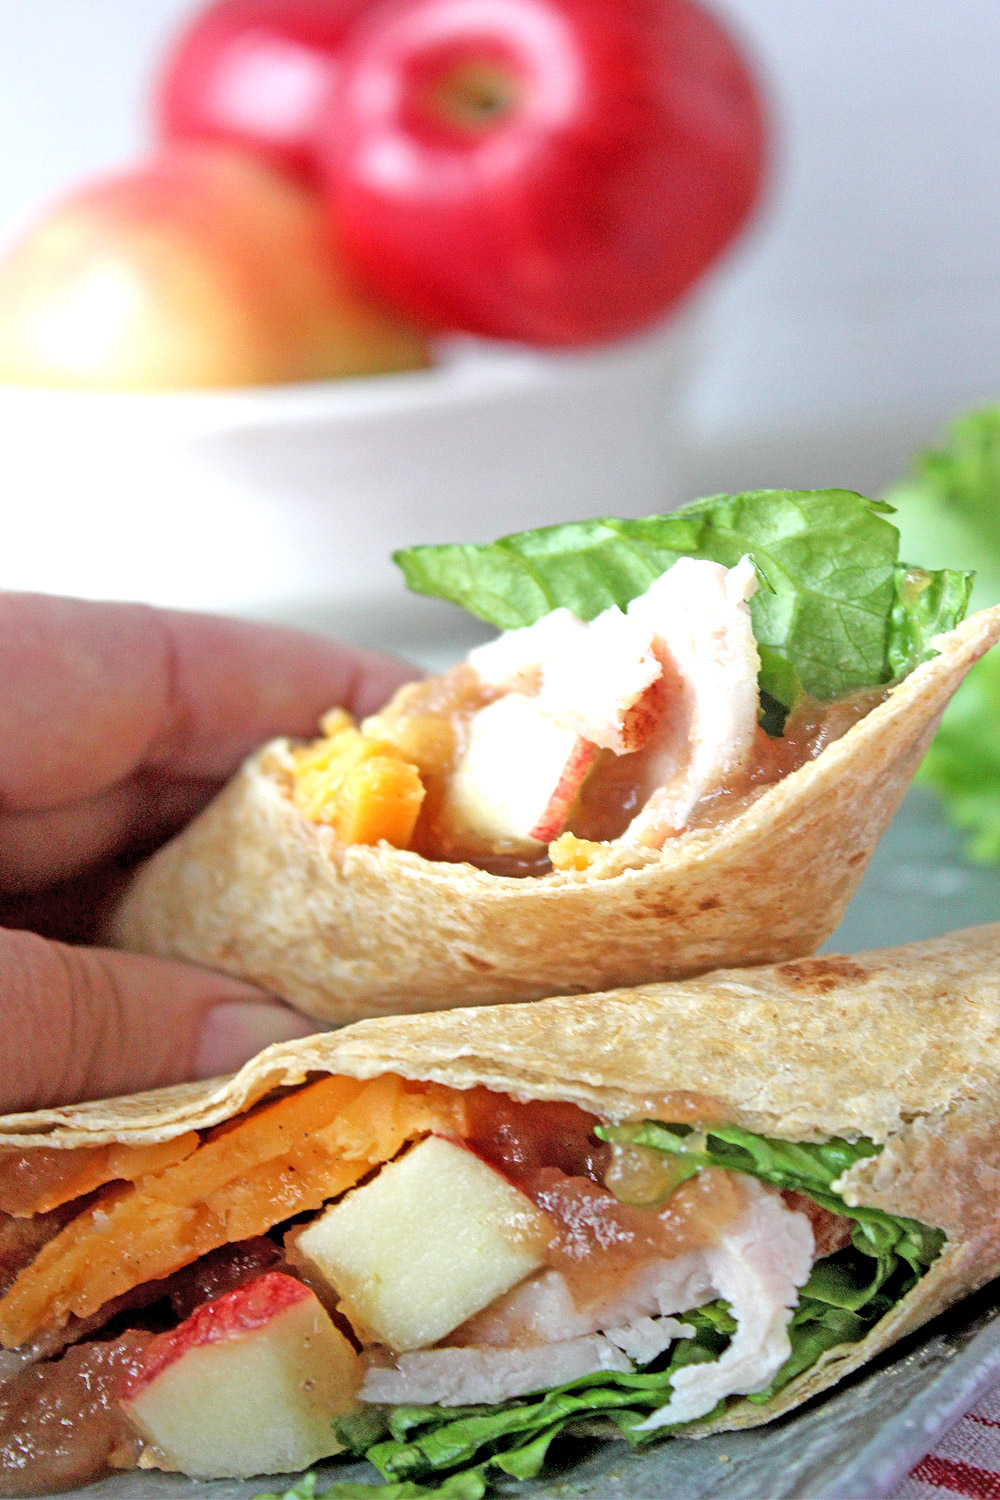 Grab our turkey wrap recipe and make one for yourself!